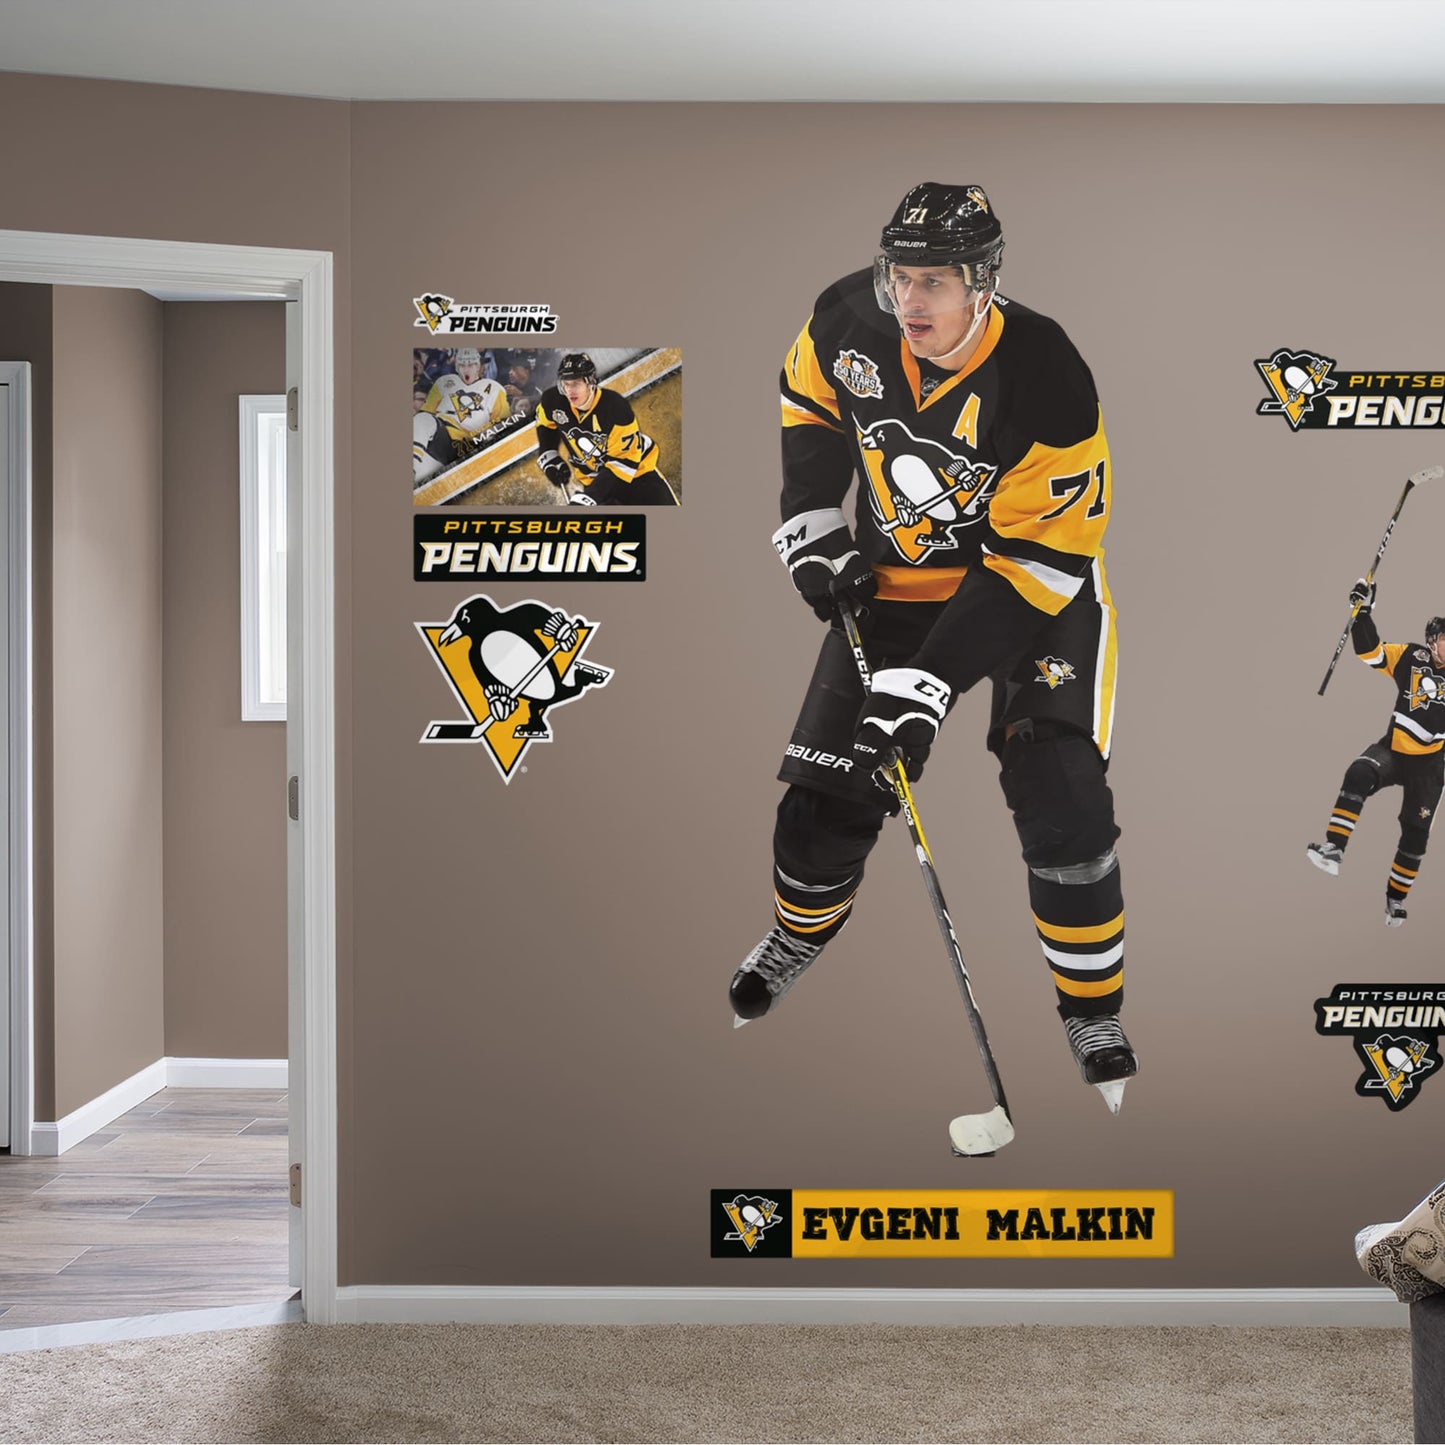 Athlete Only (32"W x 77"H) Before he became alternate captain for the Pittsburgh Penguins, Evgeni Malkin made a name for himself playing for his hometown club in Russia, the Metallurg Magnitogorsk. Drafted by the Penguins during the second round of 2014's NHL draft, Geno has since become one of the Steel City team's star standouts, and this durable, reusable wall decal makes No. 71 a regular fixture around the office, bar or bedroom.